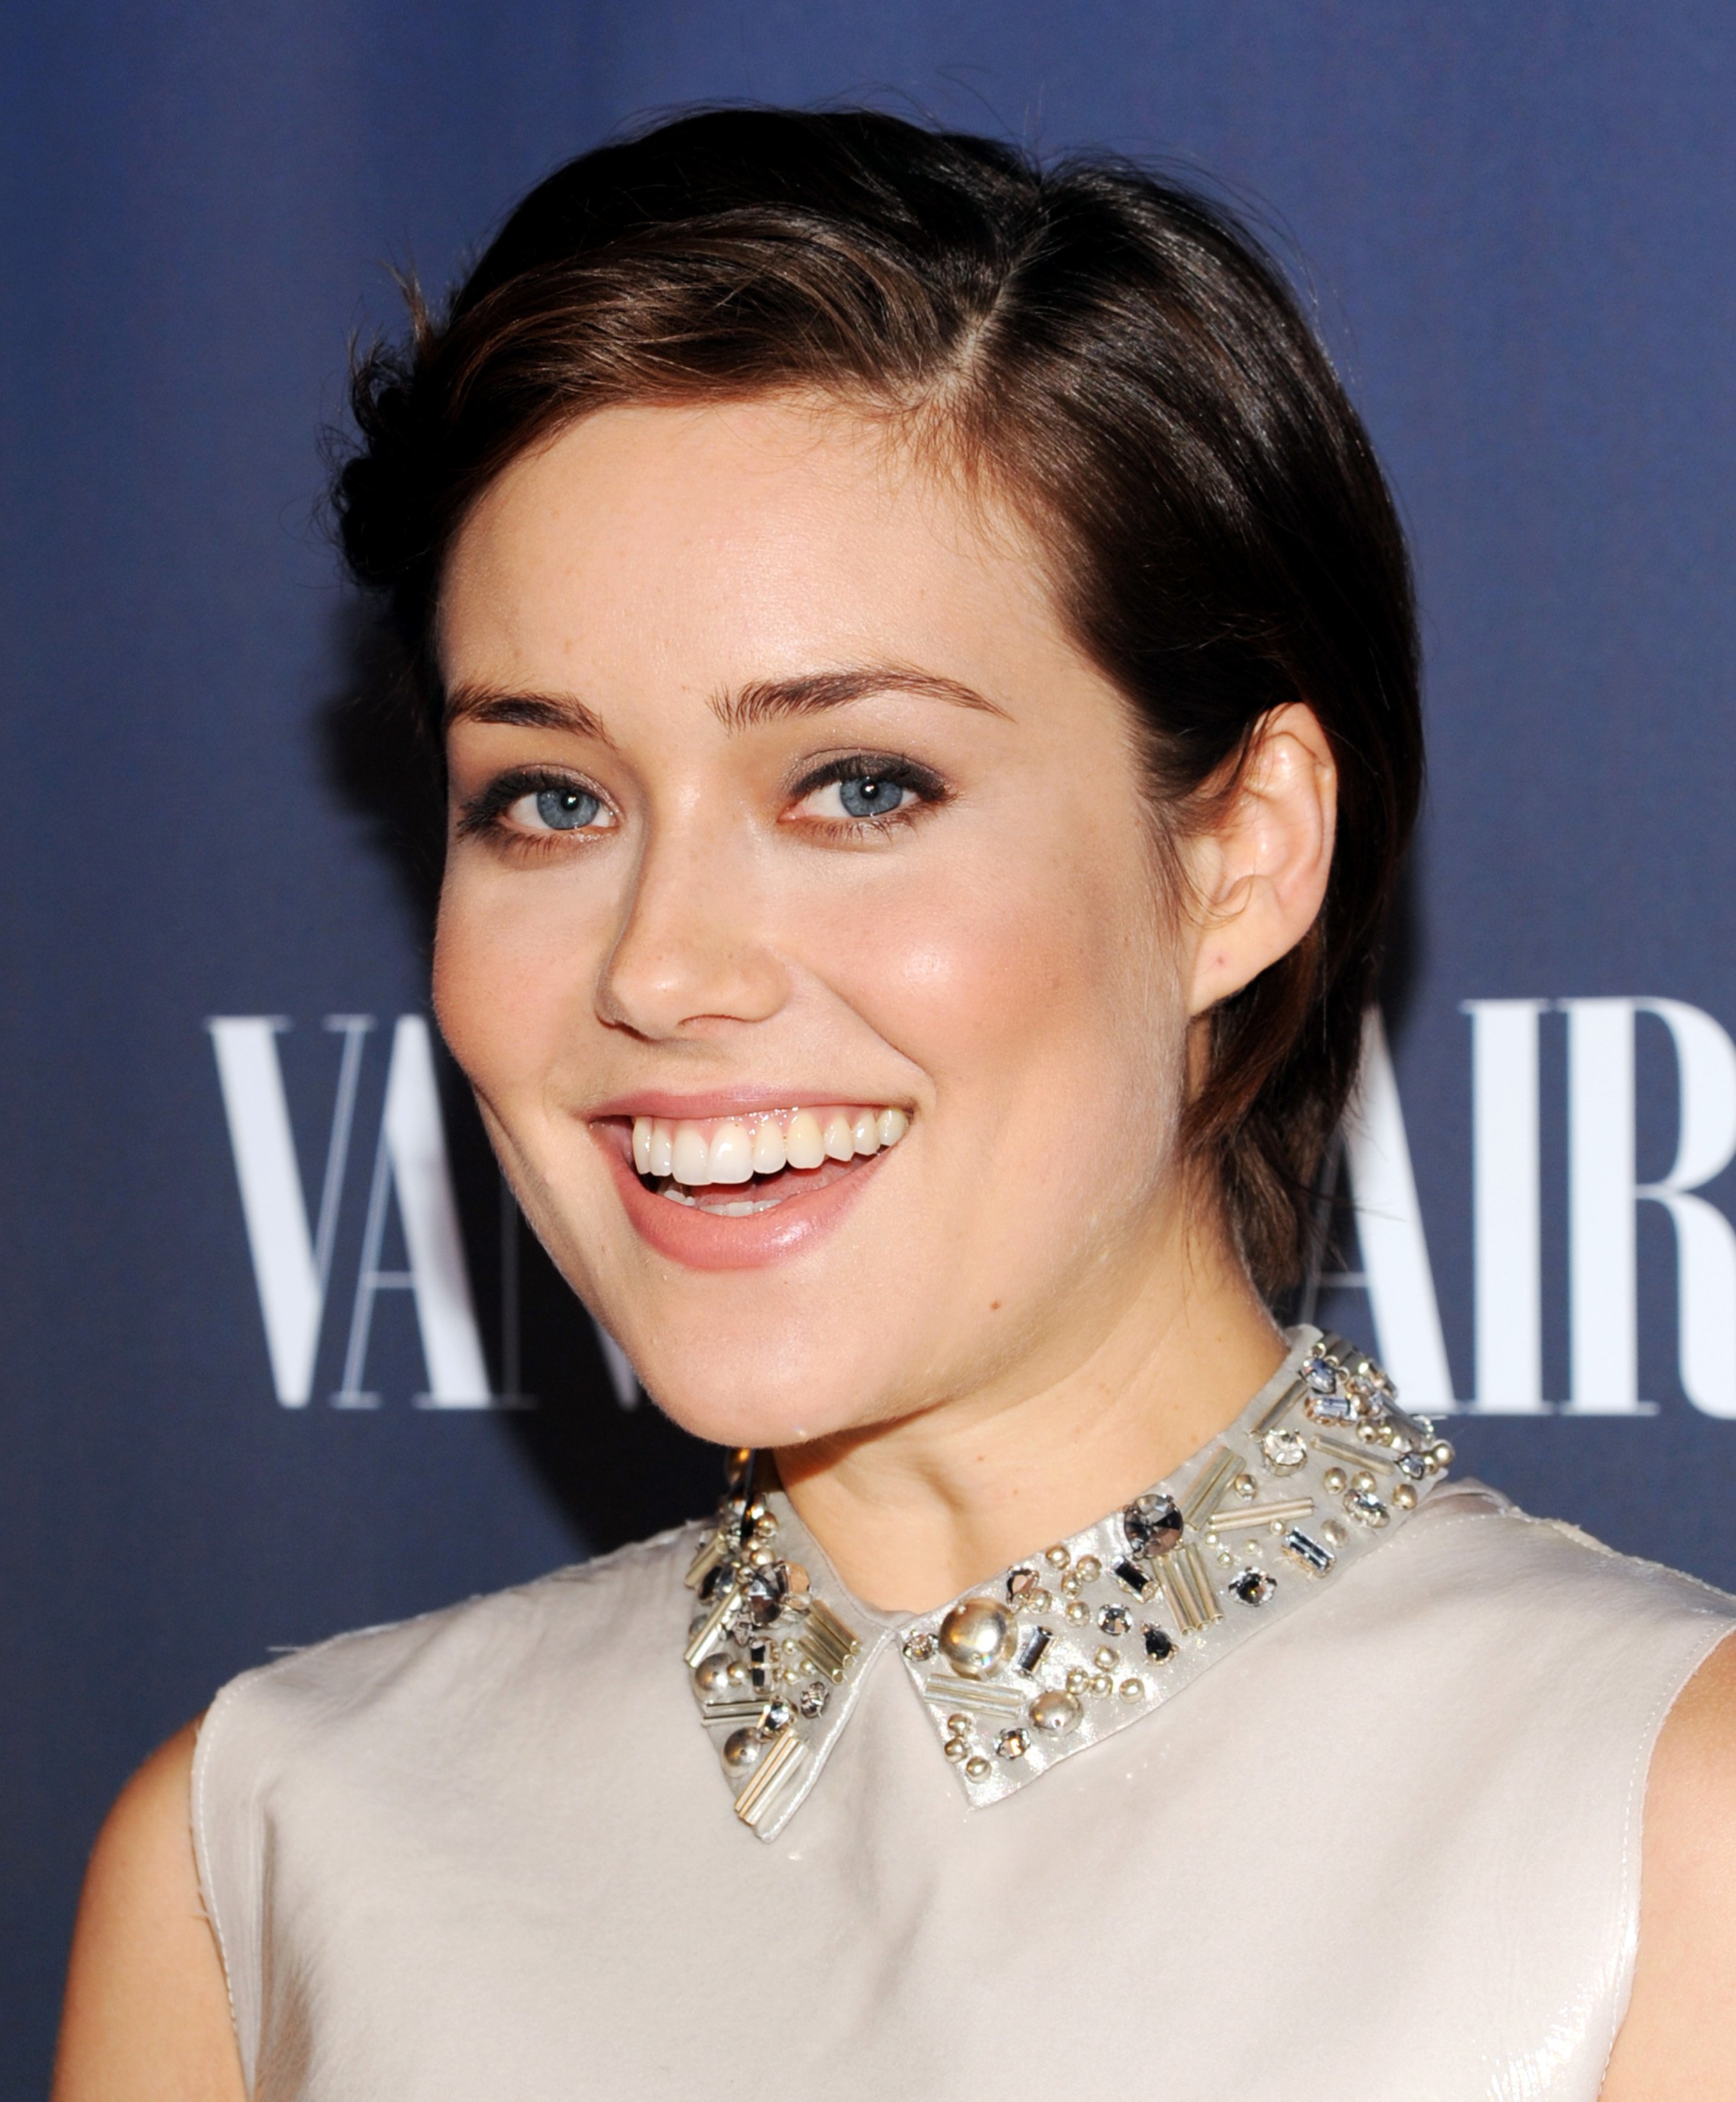 Megan Boone Wallpapers High Quality | Download Free